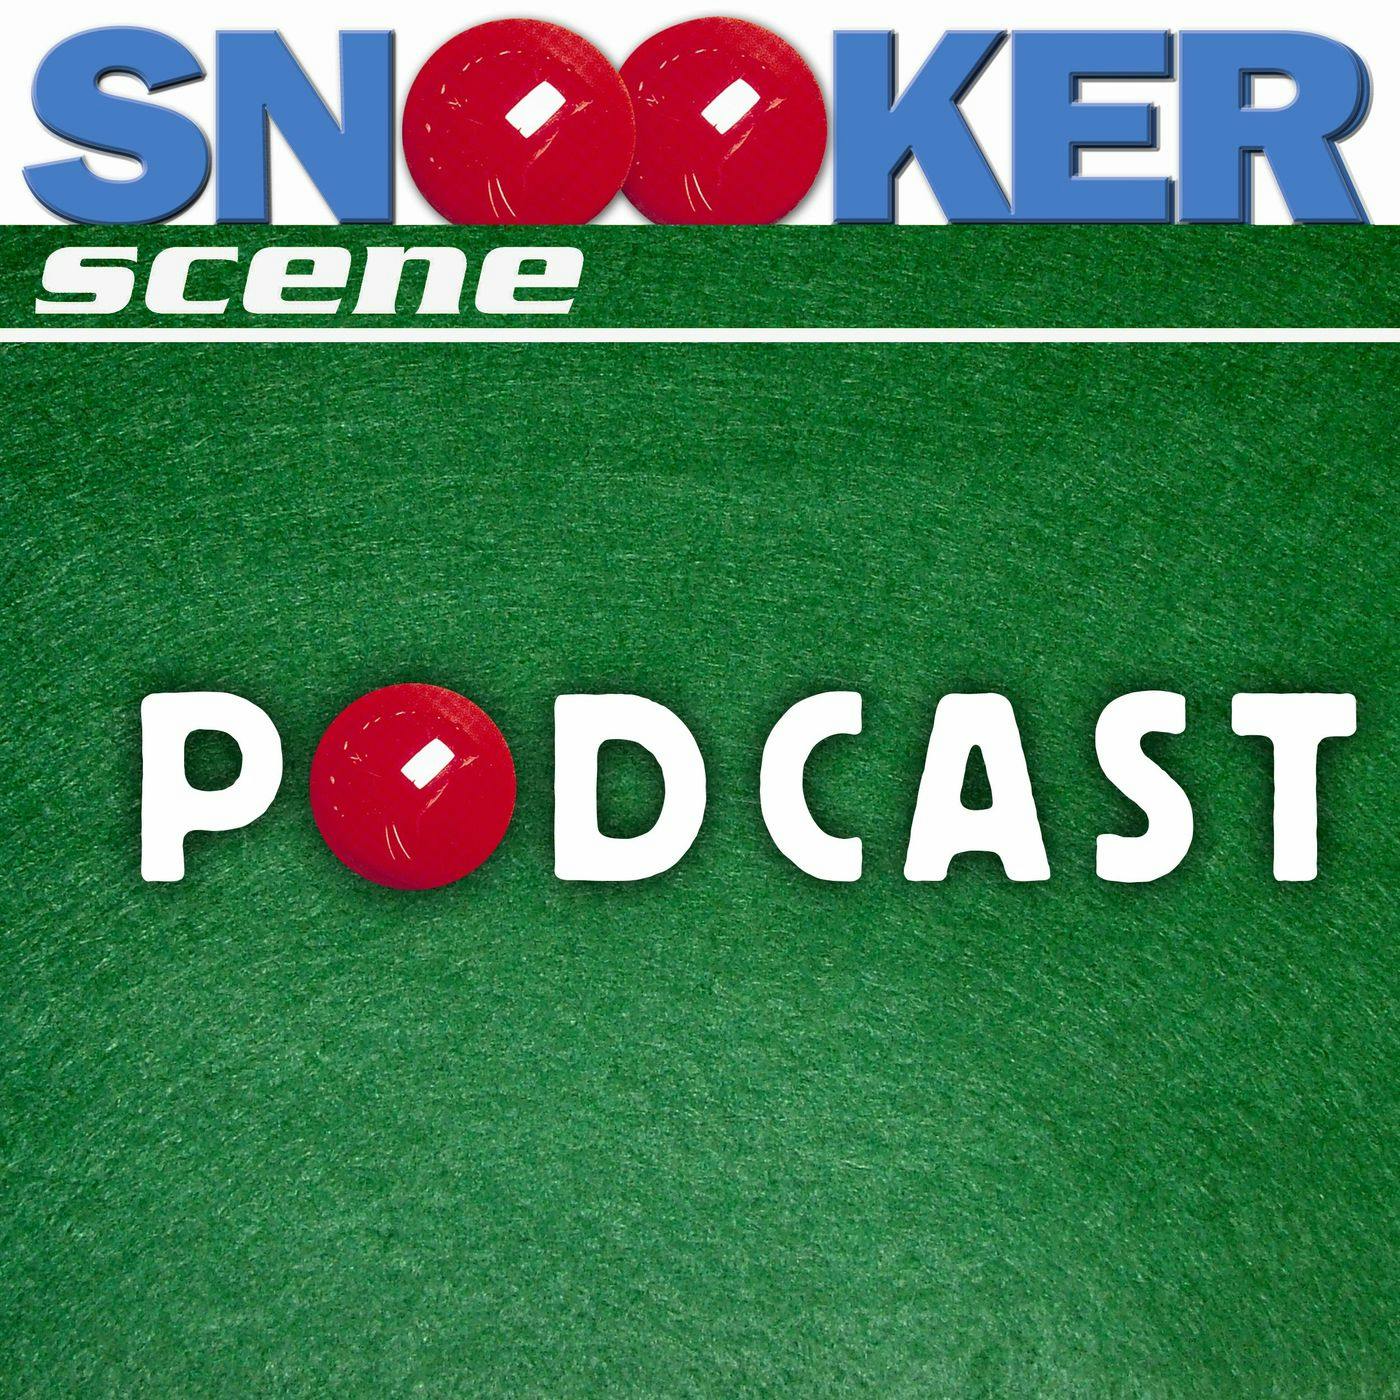 Snooker Scene Podcast episode 105 - Neal Foulds on playing at the Crucible